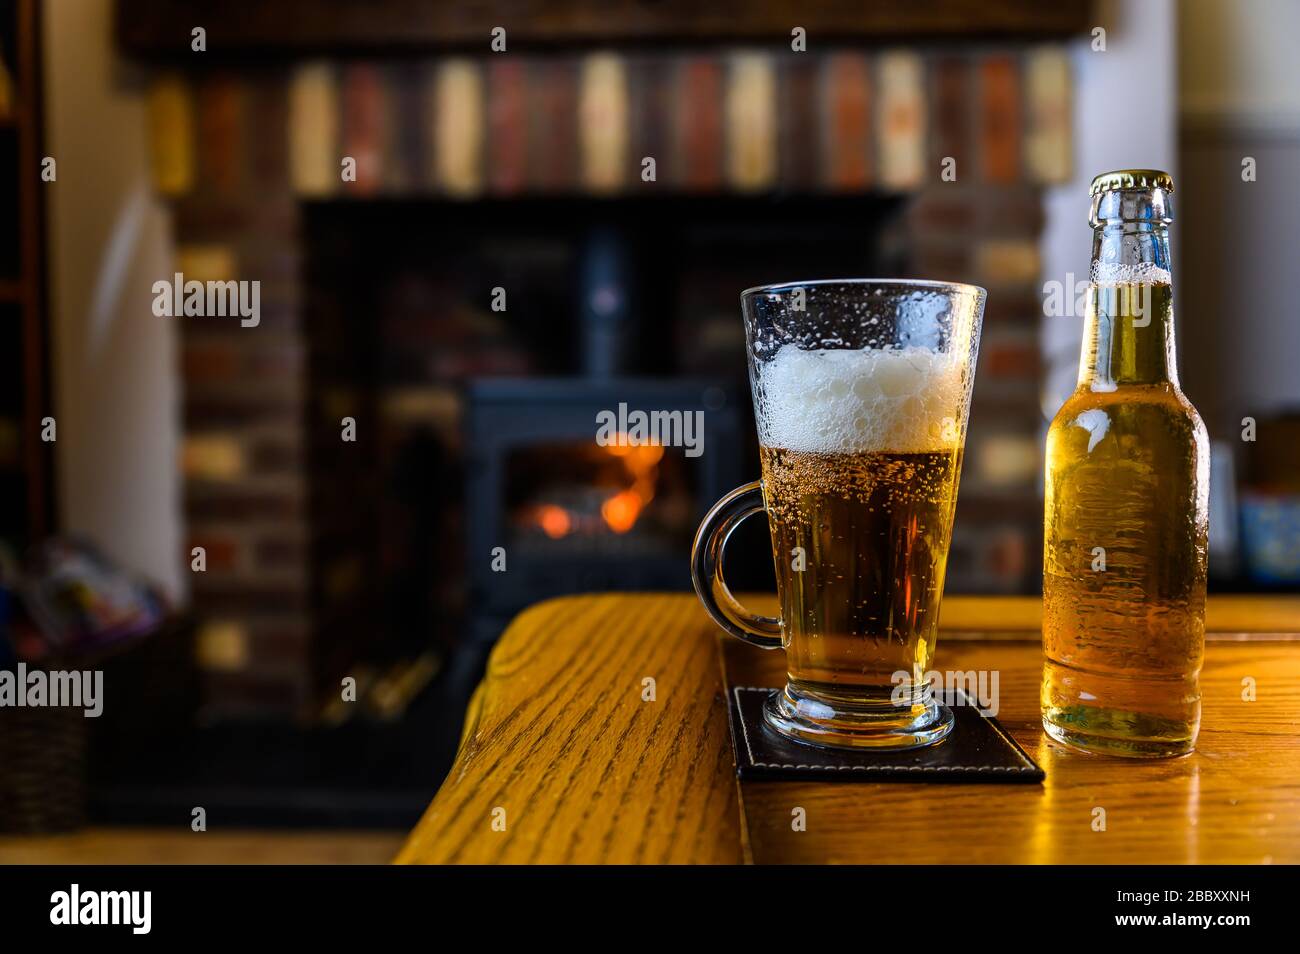 Beer poured into glass on oak table with log burner fire on background at home Stock Photo